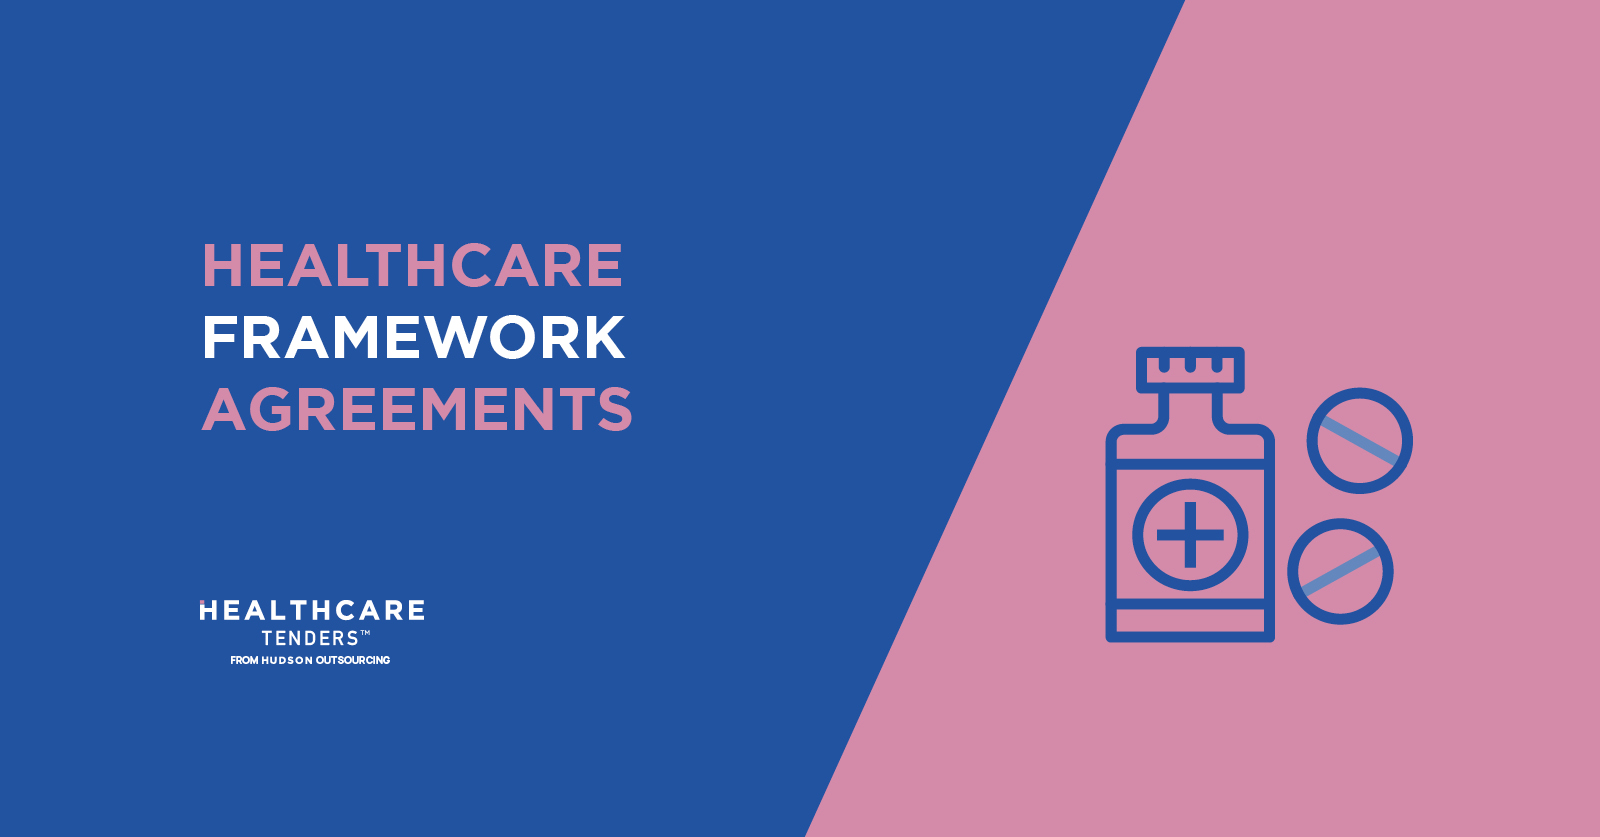 How are Healthcare Framework Agreements Adapting in 2020/21?